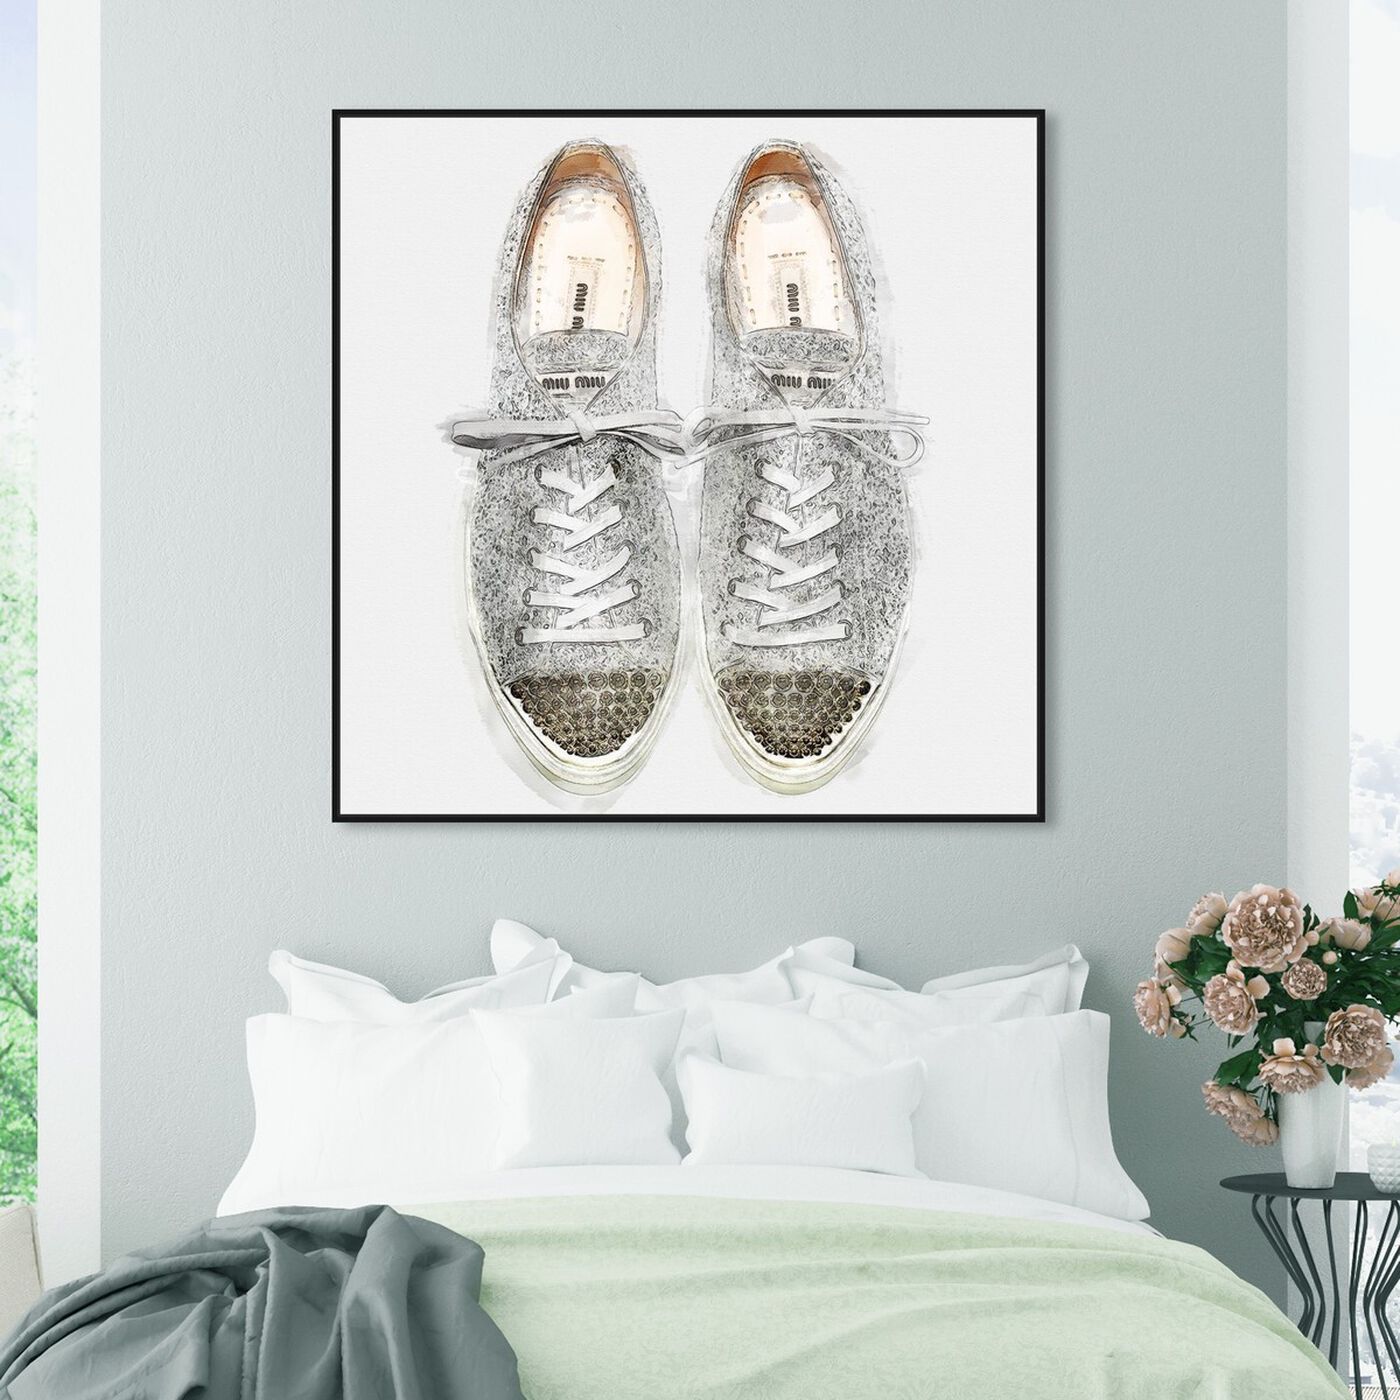 Hanging view of Sparkle Sneakers featuring fashion and glam and shoes art.